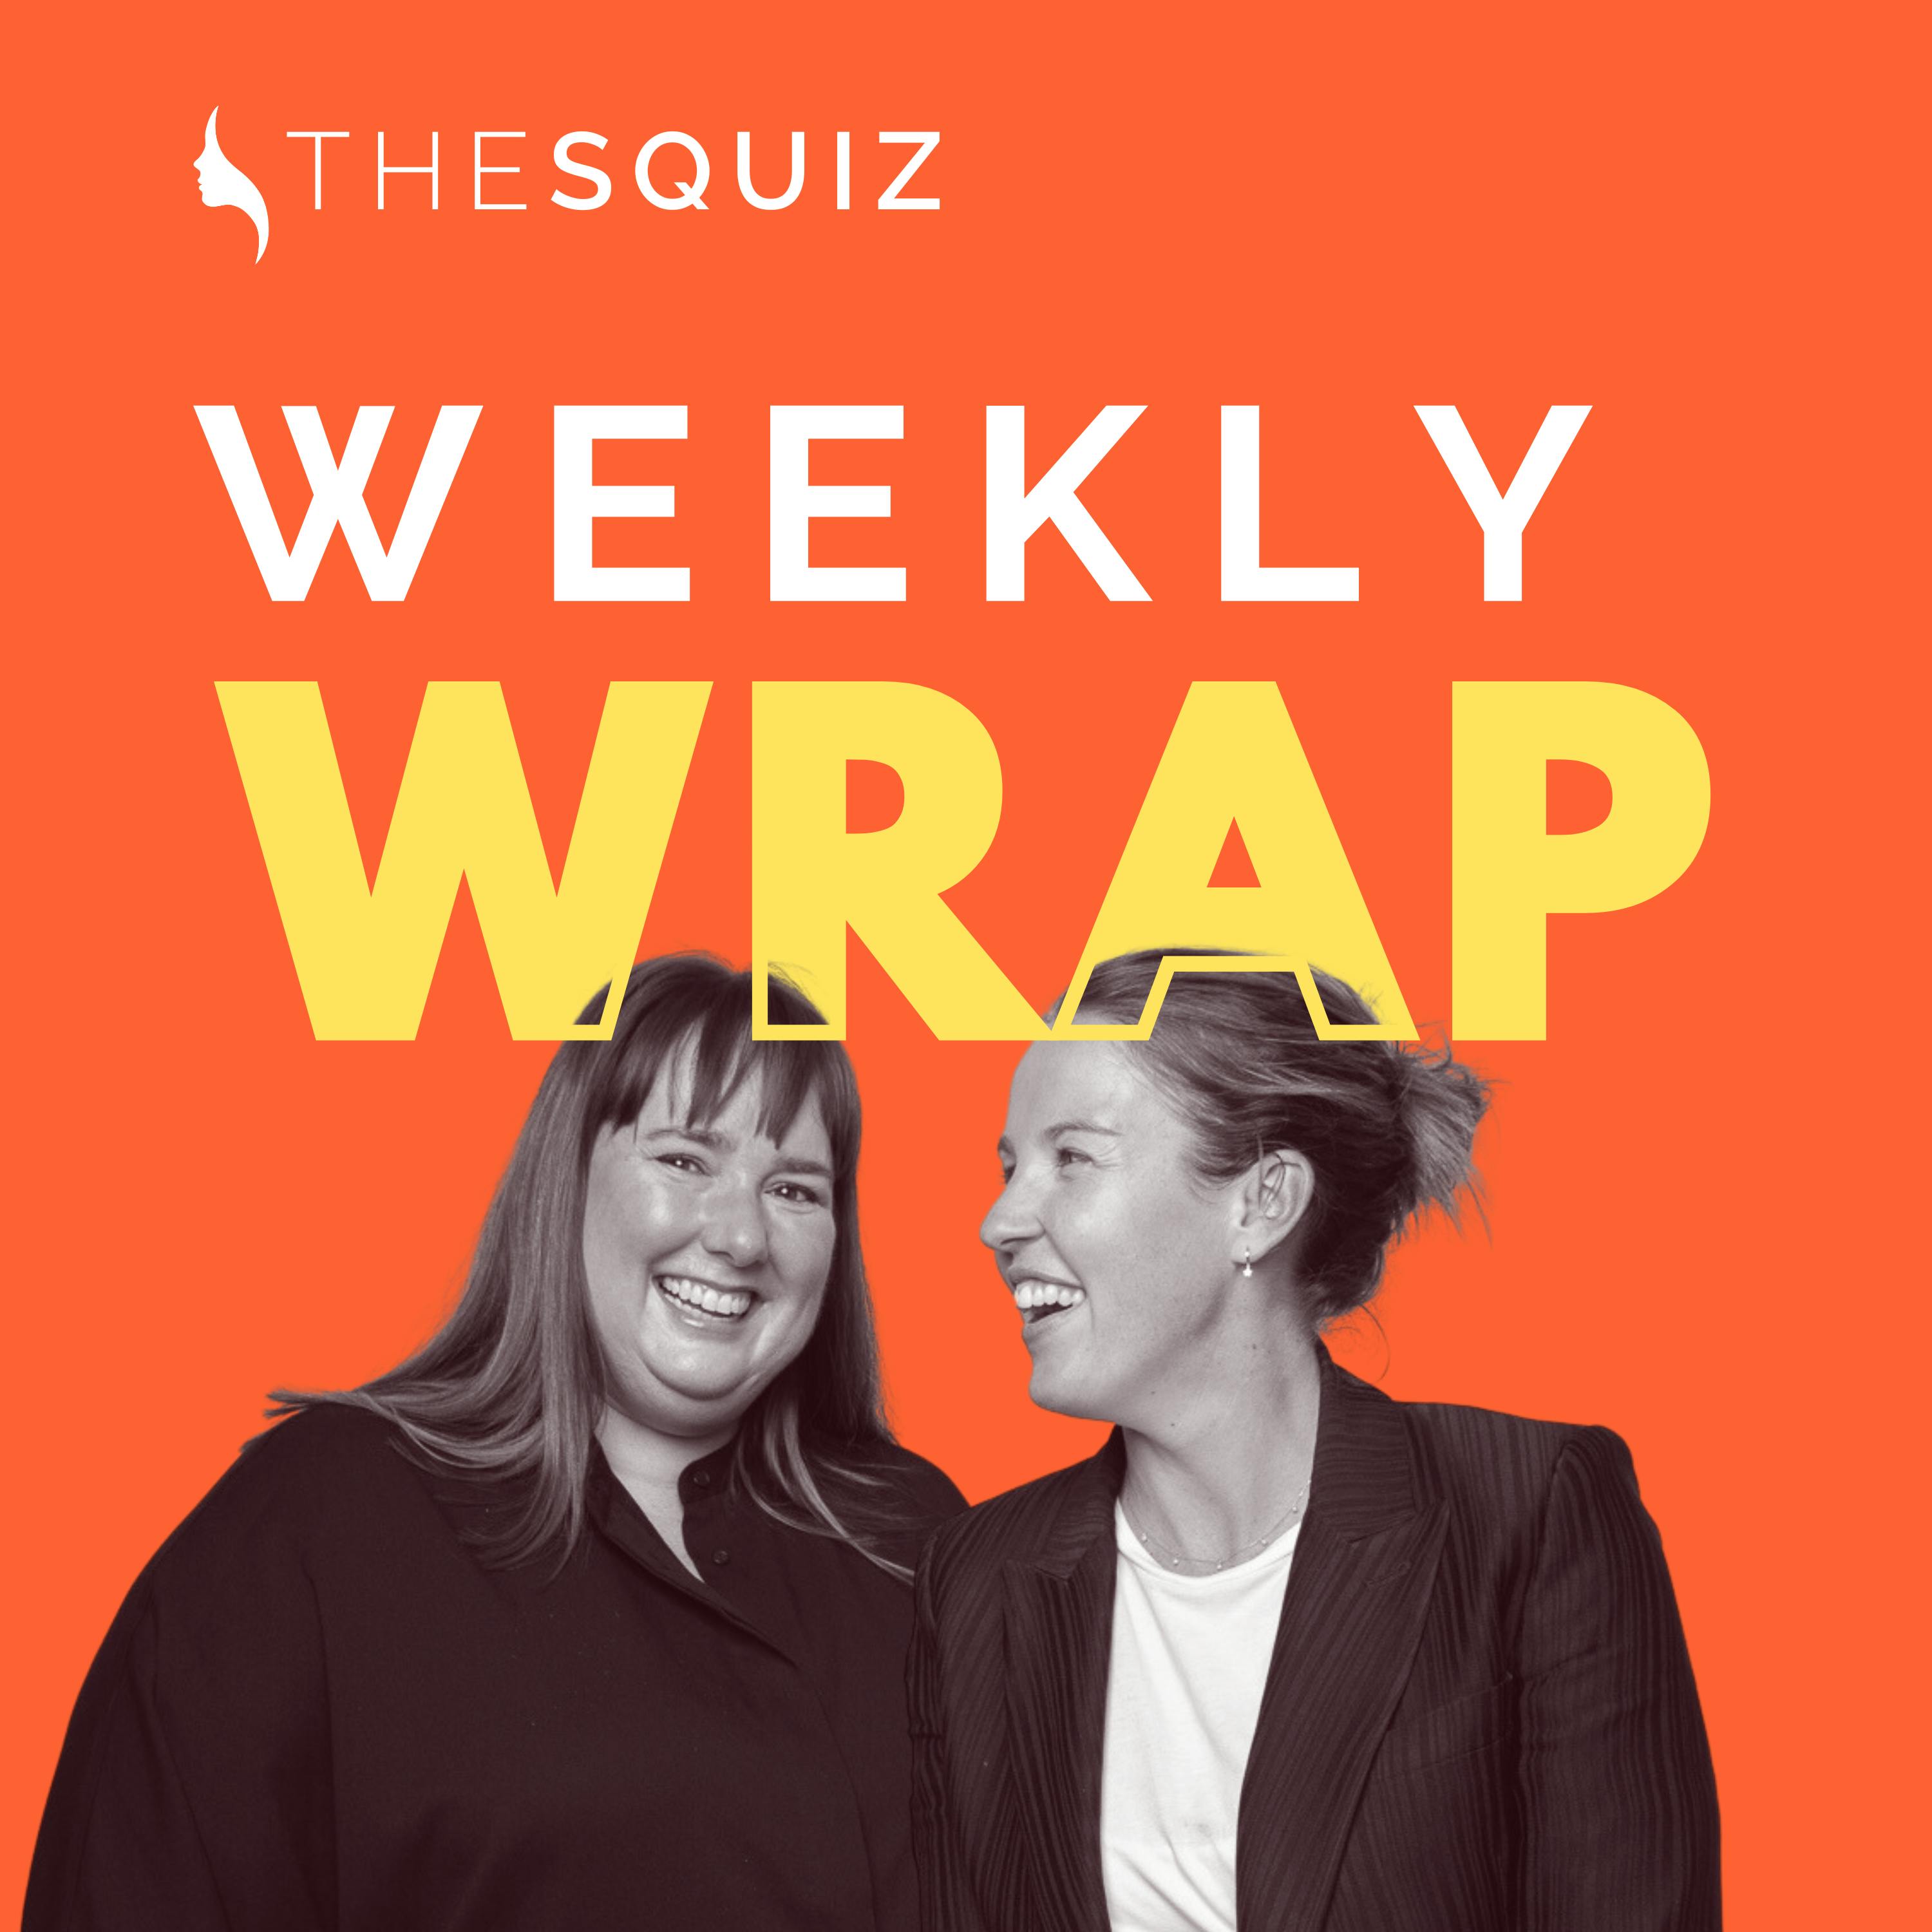 Weekly Wrap: A big wrap of Aussie politics, airstrikes in Gaza, and Taylor Swift named 2023 Person of the Year